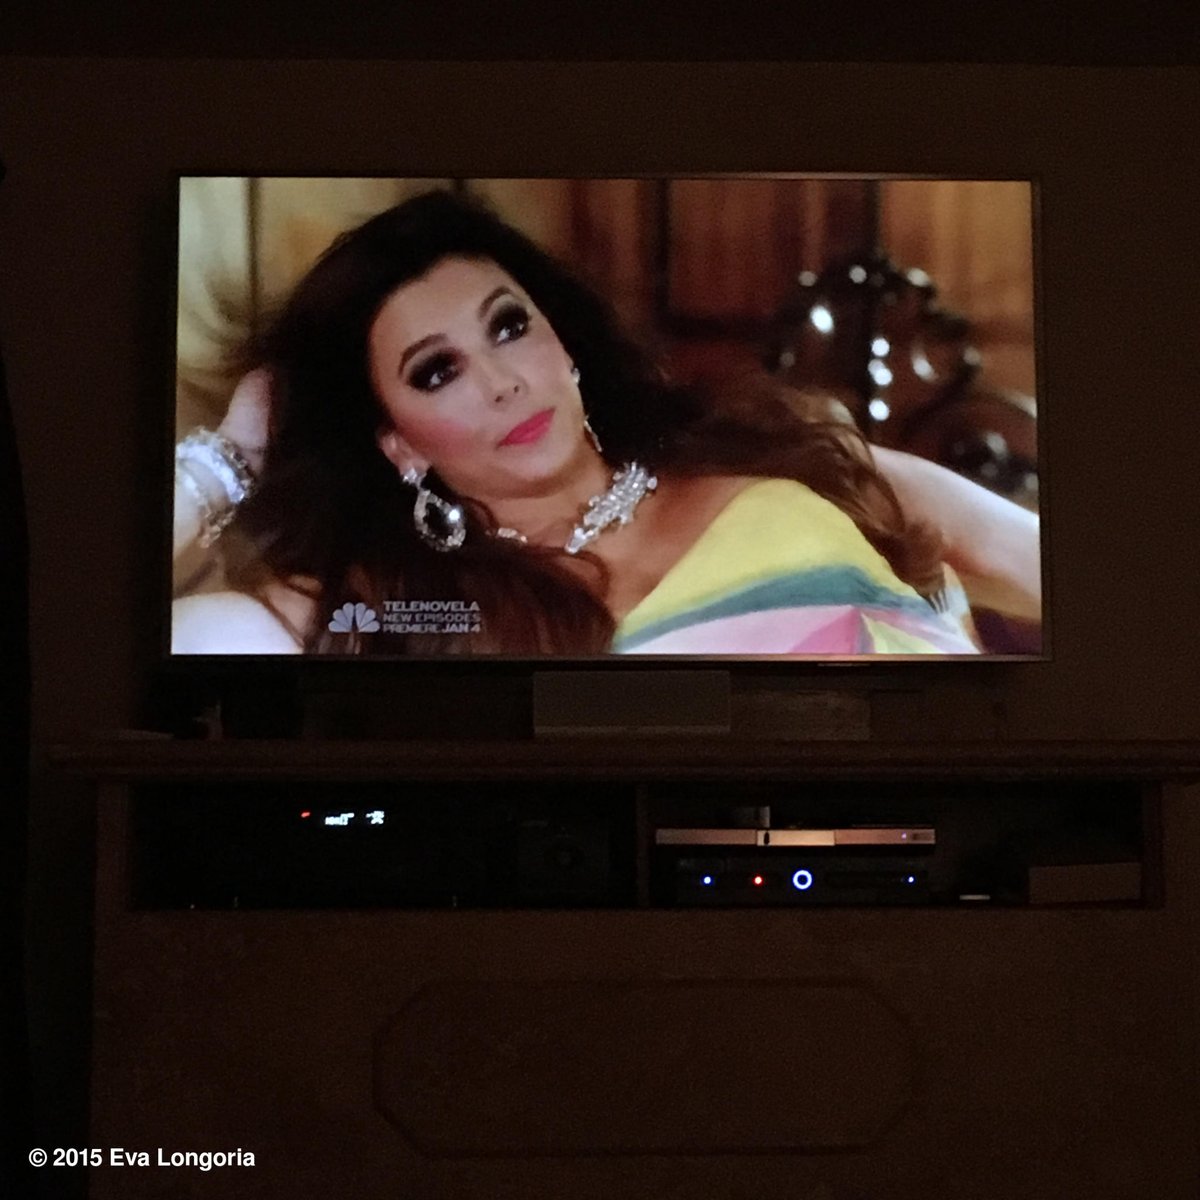 It's starting West coast! #Telenovela Who's watching with me!?? https://t.co/x5nNQu5ZSh